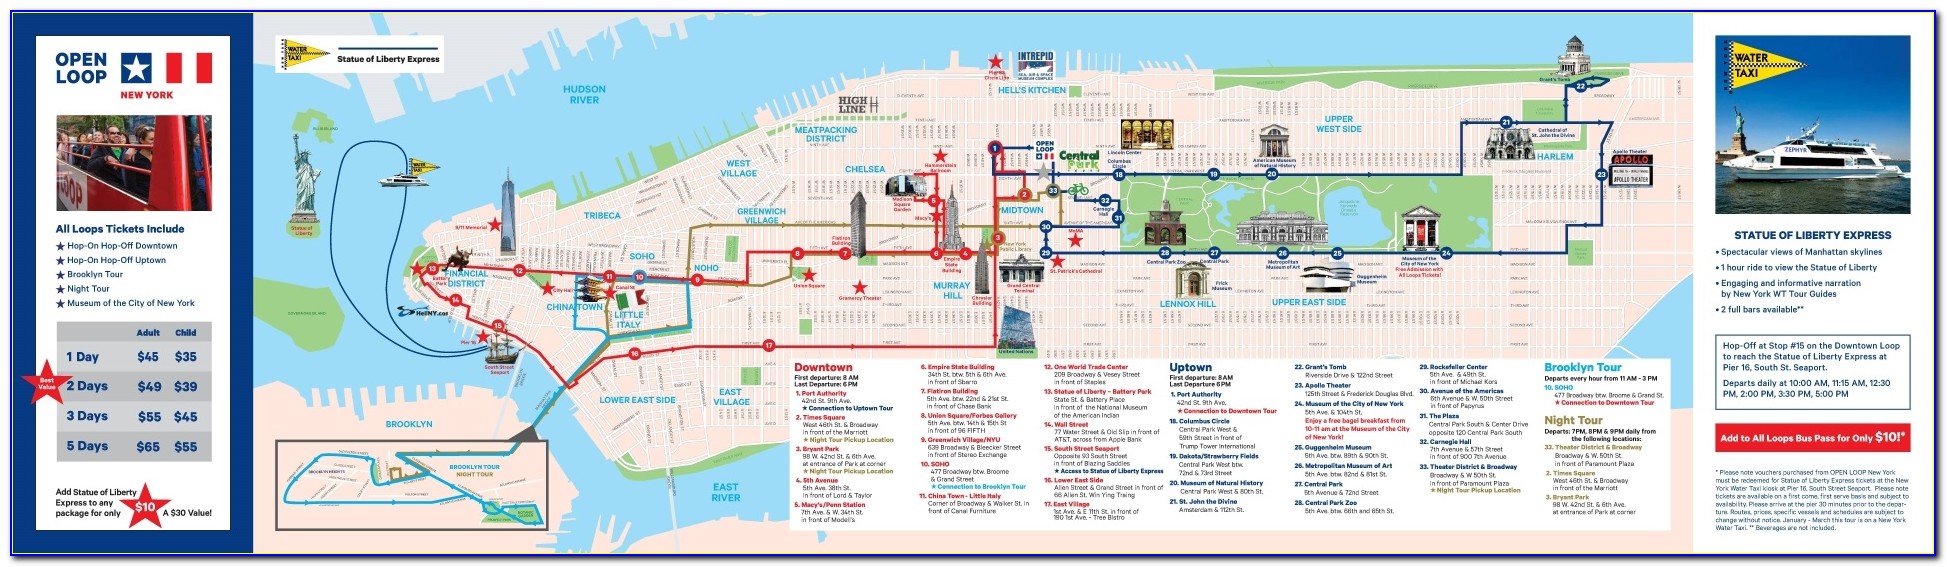 Nyc Hop On Hop Off Bus Route Map Grayline Map Resume